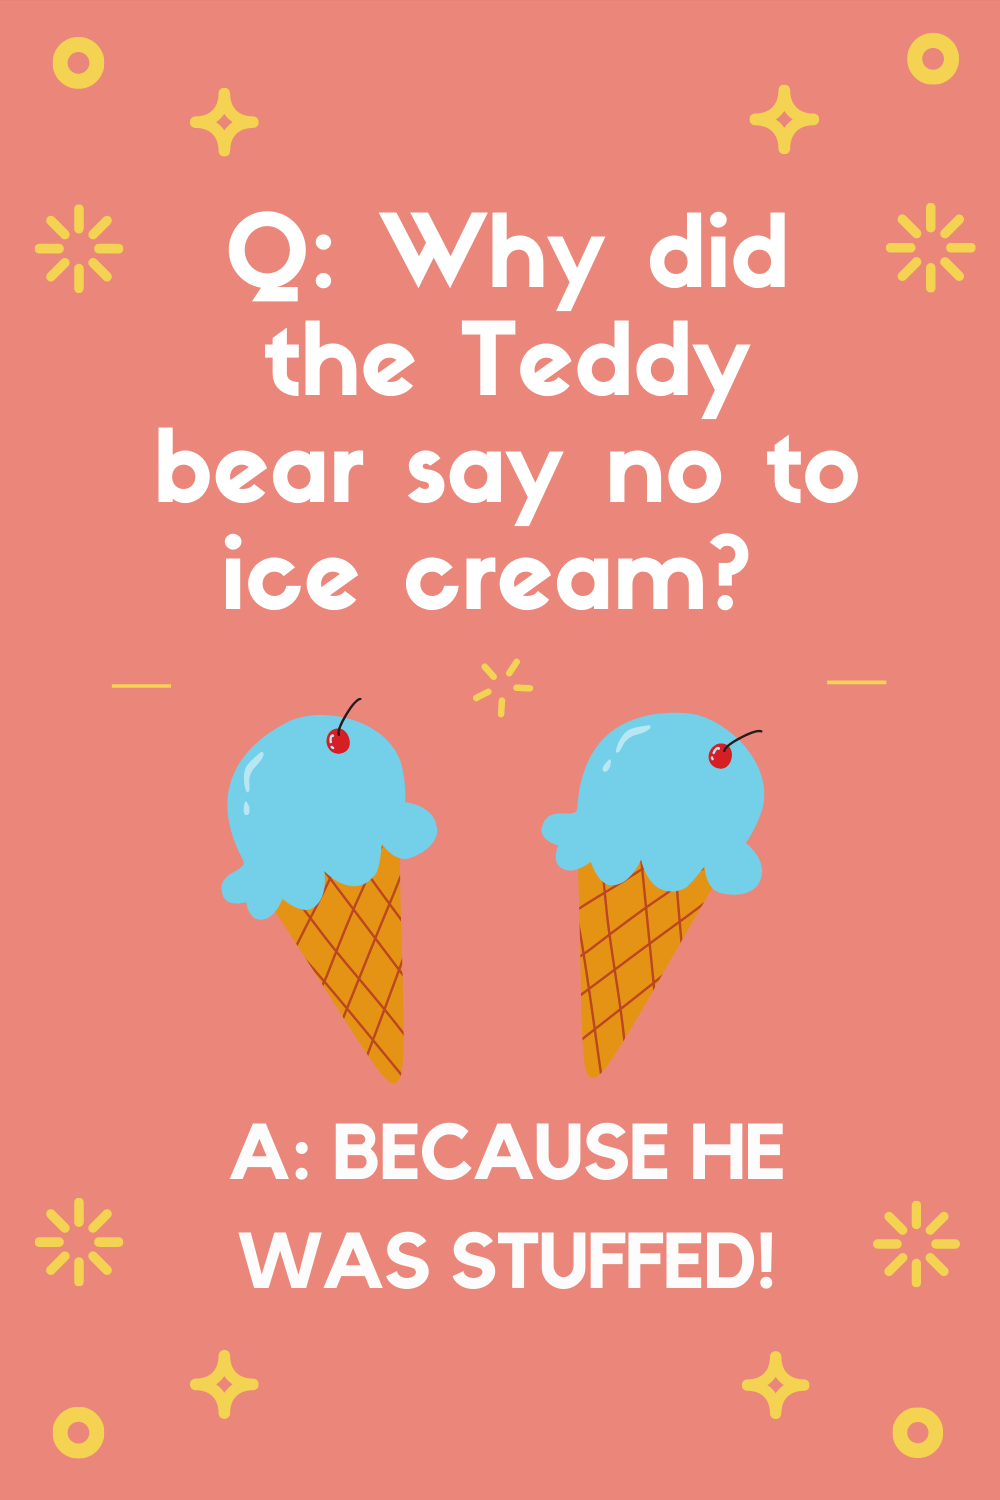 Ice Cream Quotes and Holidays, Fun Ice Cream Jokes and Silly Ice Cream Puns!  PLUS FREE CALENDAR — The Sweetest Escapes